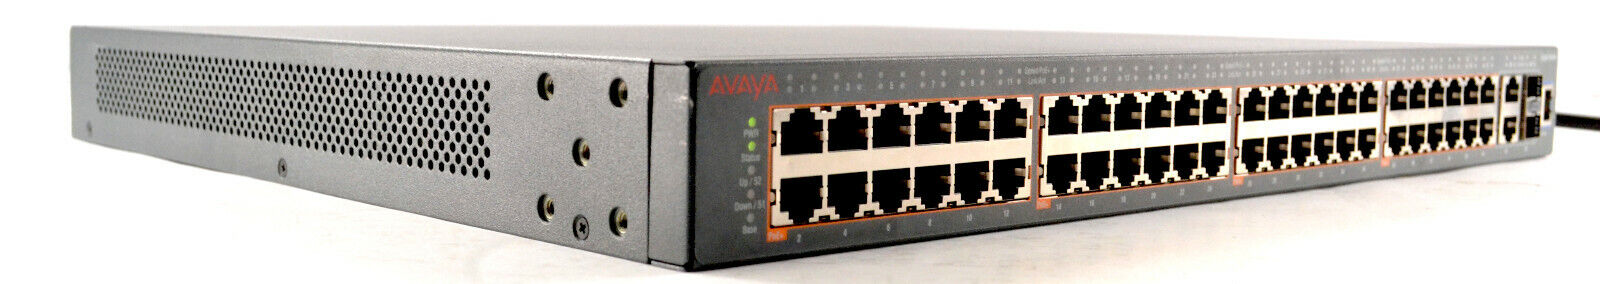 Avaya Ethernet Routing Switch 3550T-PWR+ - switch - 48 ports